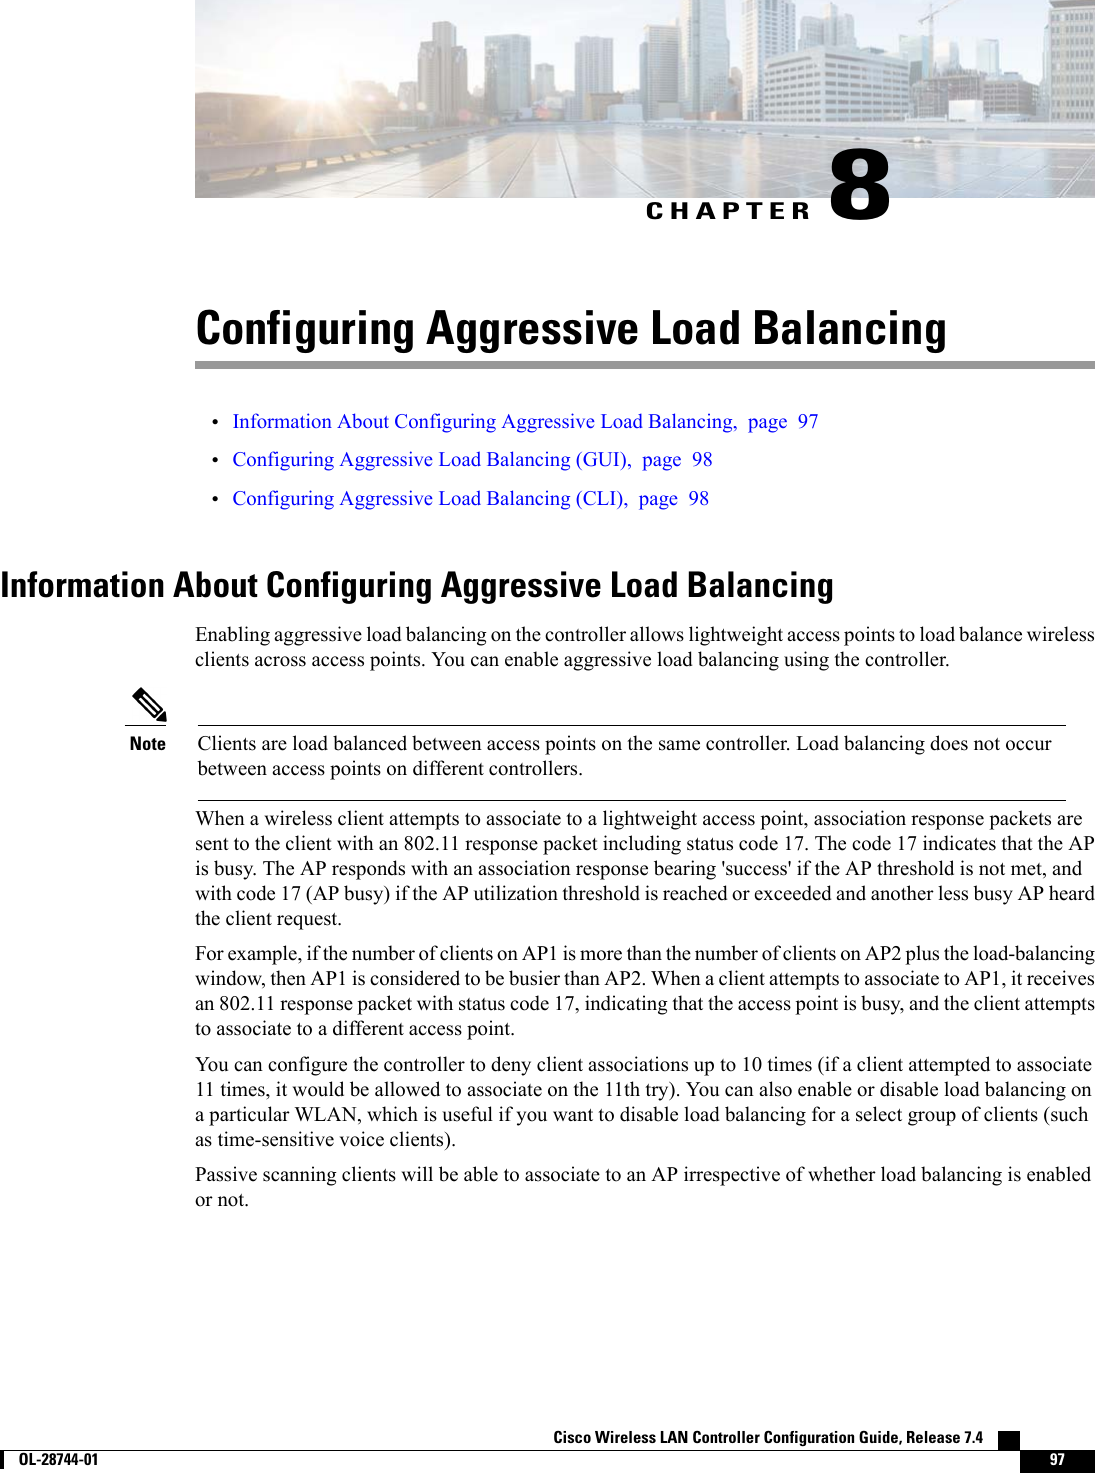 CHAPTER 8Configuring Aggressive Load Balancing•Information About Configuring Aggressive Load Balancing, page 97•Configuring Aggressive Load Balancing (GUI), page 98•Configuring Aggressive Load Balancing (CLI), page 98Information About Configuring Aggressive Load BalancingEnabling aggressive load balancing on the controller allows lightweight access points to load balance wirelessclients across access points. You can enable aggressive load balancing using the controller.Clients are load balanced between access points on the same controller. Load balancing does not occurbetween access points on different controllers.NoteWhen a wireless client attempts to associate to a lightweight access point, association response packets aresent to the client with an 802.11 response packet including status code 17. The code 17 indicates that the APis busy. The AP responds with an association response bearing &apos;success&apos; if the AP threshold is not met, andwith code 17 (AP busy) if the AP utilization threshold is reached or exceeded and another less busy AP heardthe client request.For example, if the number of clients on AP1 is more than the number of clients on AP2 plus the load-balancingwindow, then AP1 is considered to be busier than AP2. When a client attempts to associate to AP1, it receivesan 802.11 response packet with status code 17, indicating that the access point is busy, and the client attemptsto associate to a different access point.You can configure the controller to deny client associations up to 10 times (if a client attempted to associate11 times, it would be allowed to associate on the 11th try). You can also enable or disable load balancing ona particular WLAN, which is useful if you want to disable load balancing for a select group of clients (suchas time-sensitive voice clients).Passive scanning clients will be able to associate to an AP irrespective of whether load balancing is enabledor not.Cisco Wireless LAN Controller Configuration Guide, Release 7.4        OL-28744-01 97